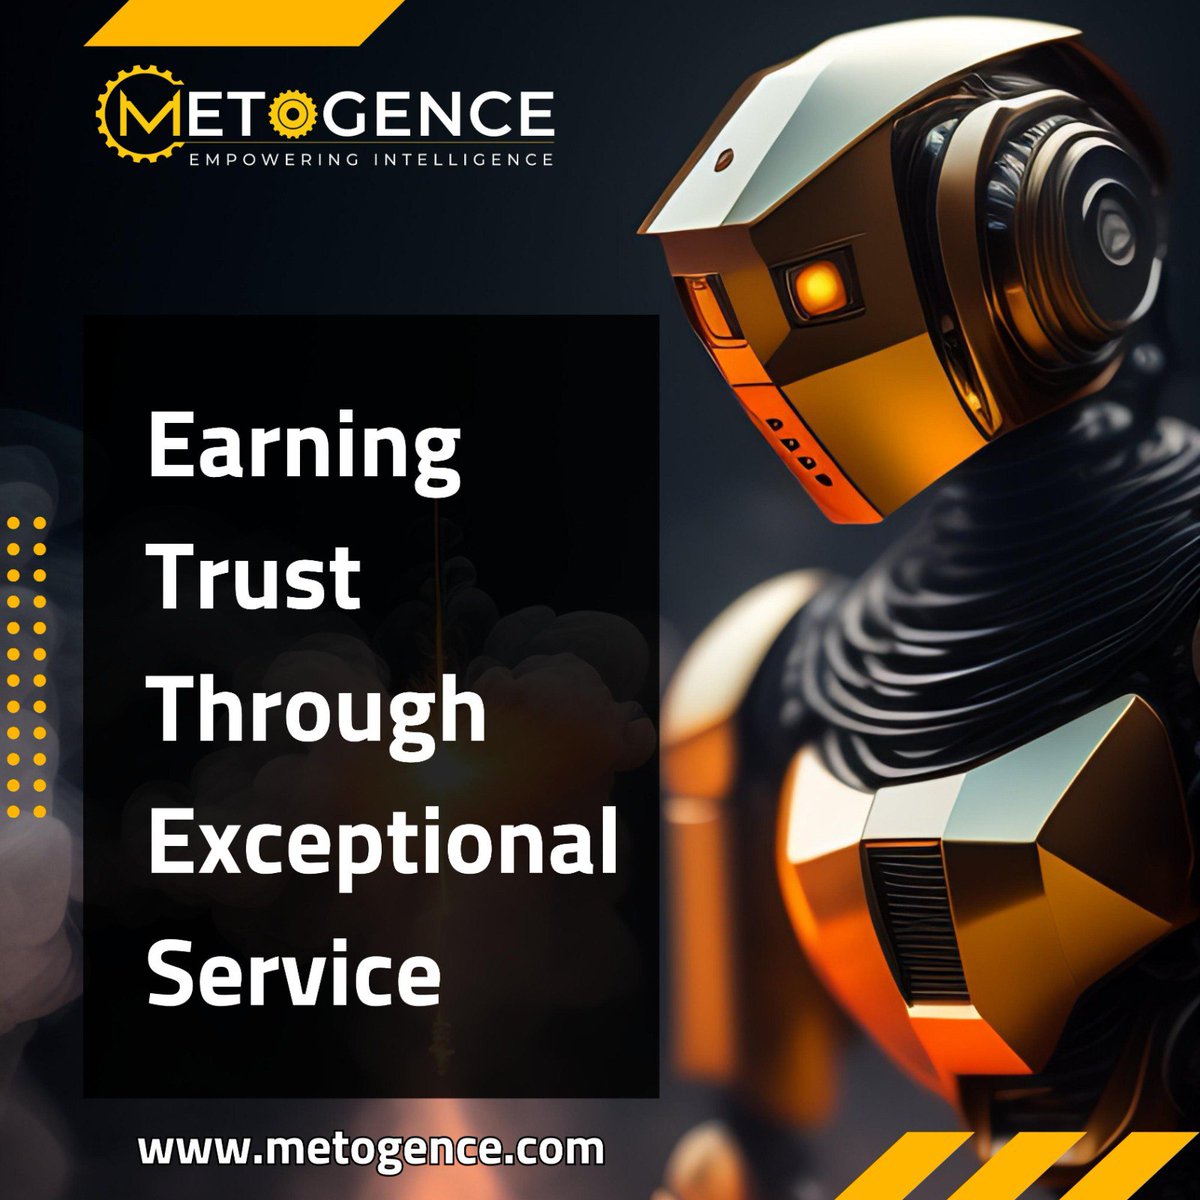 ➡️ Register account: metogence.com/guide/BOT79148… 

#Metogence #TechnologyMeetsExcellence #AI #CuttingEdge #CryptoInvestment #FinancialGoals #Innovation #InvestWithConfidence #DigitalAssets #Cryptocurrency #MetogenceAI #FinancialGrowth #RedefiningPossibilities #RewardsProgram